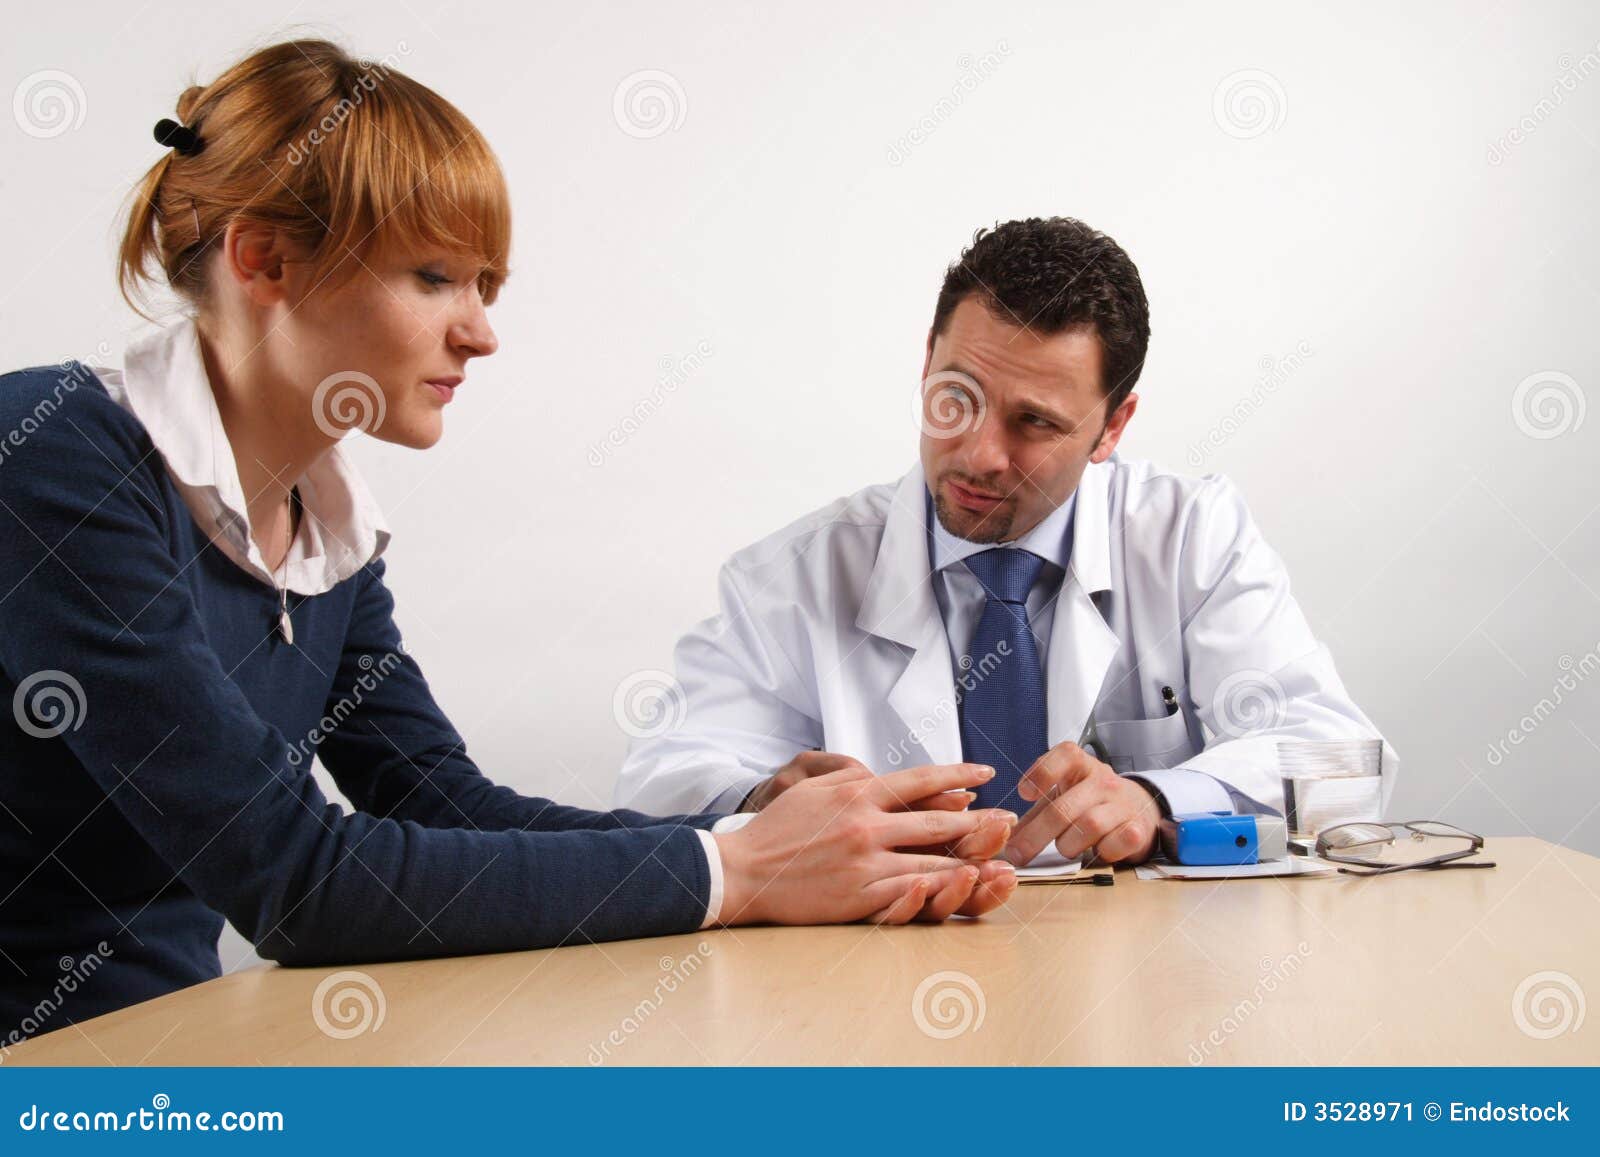 Bad News Doctor And Patient Stock Image Image Of Discussing Health 3528971